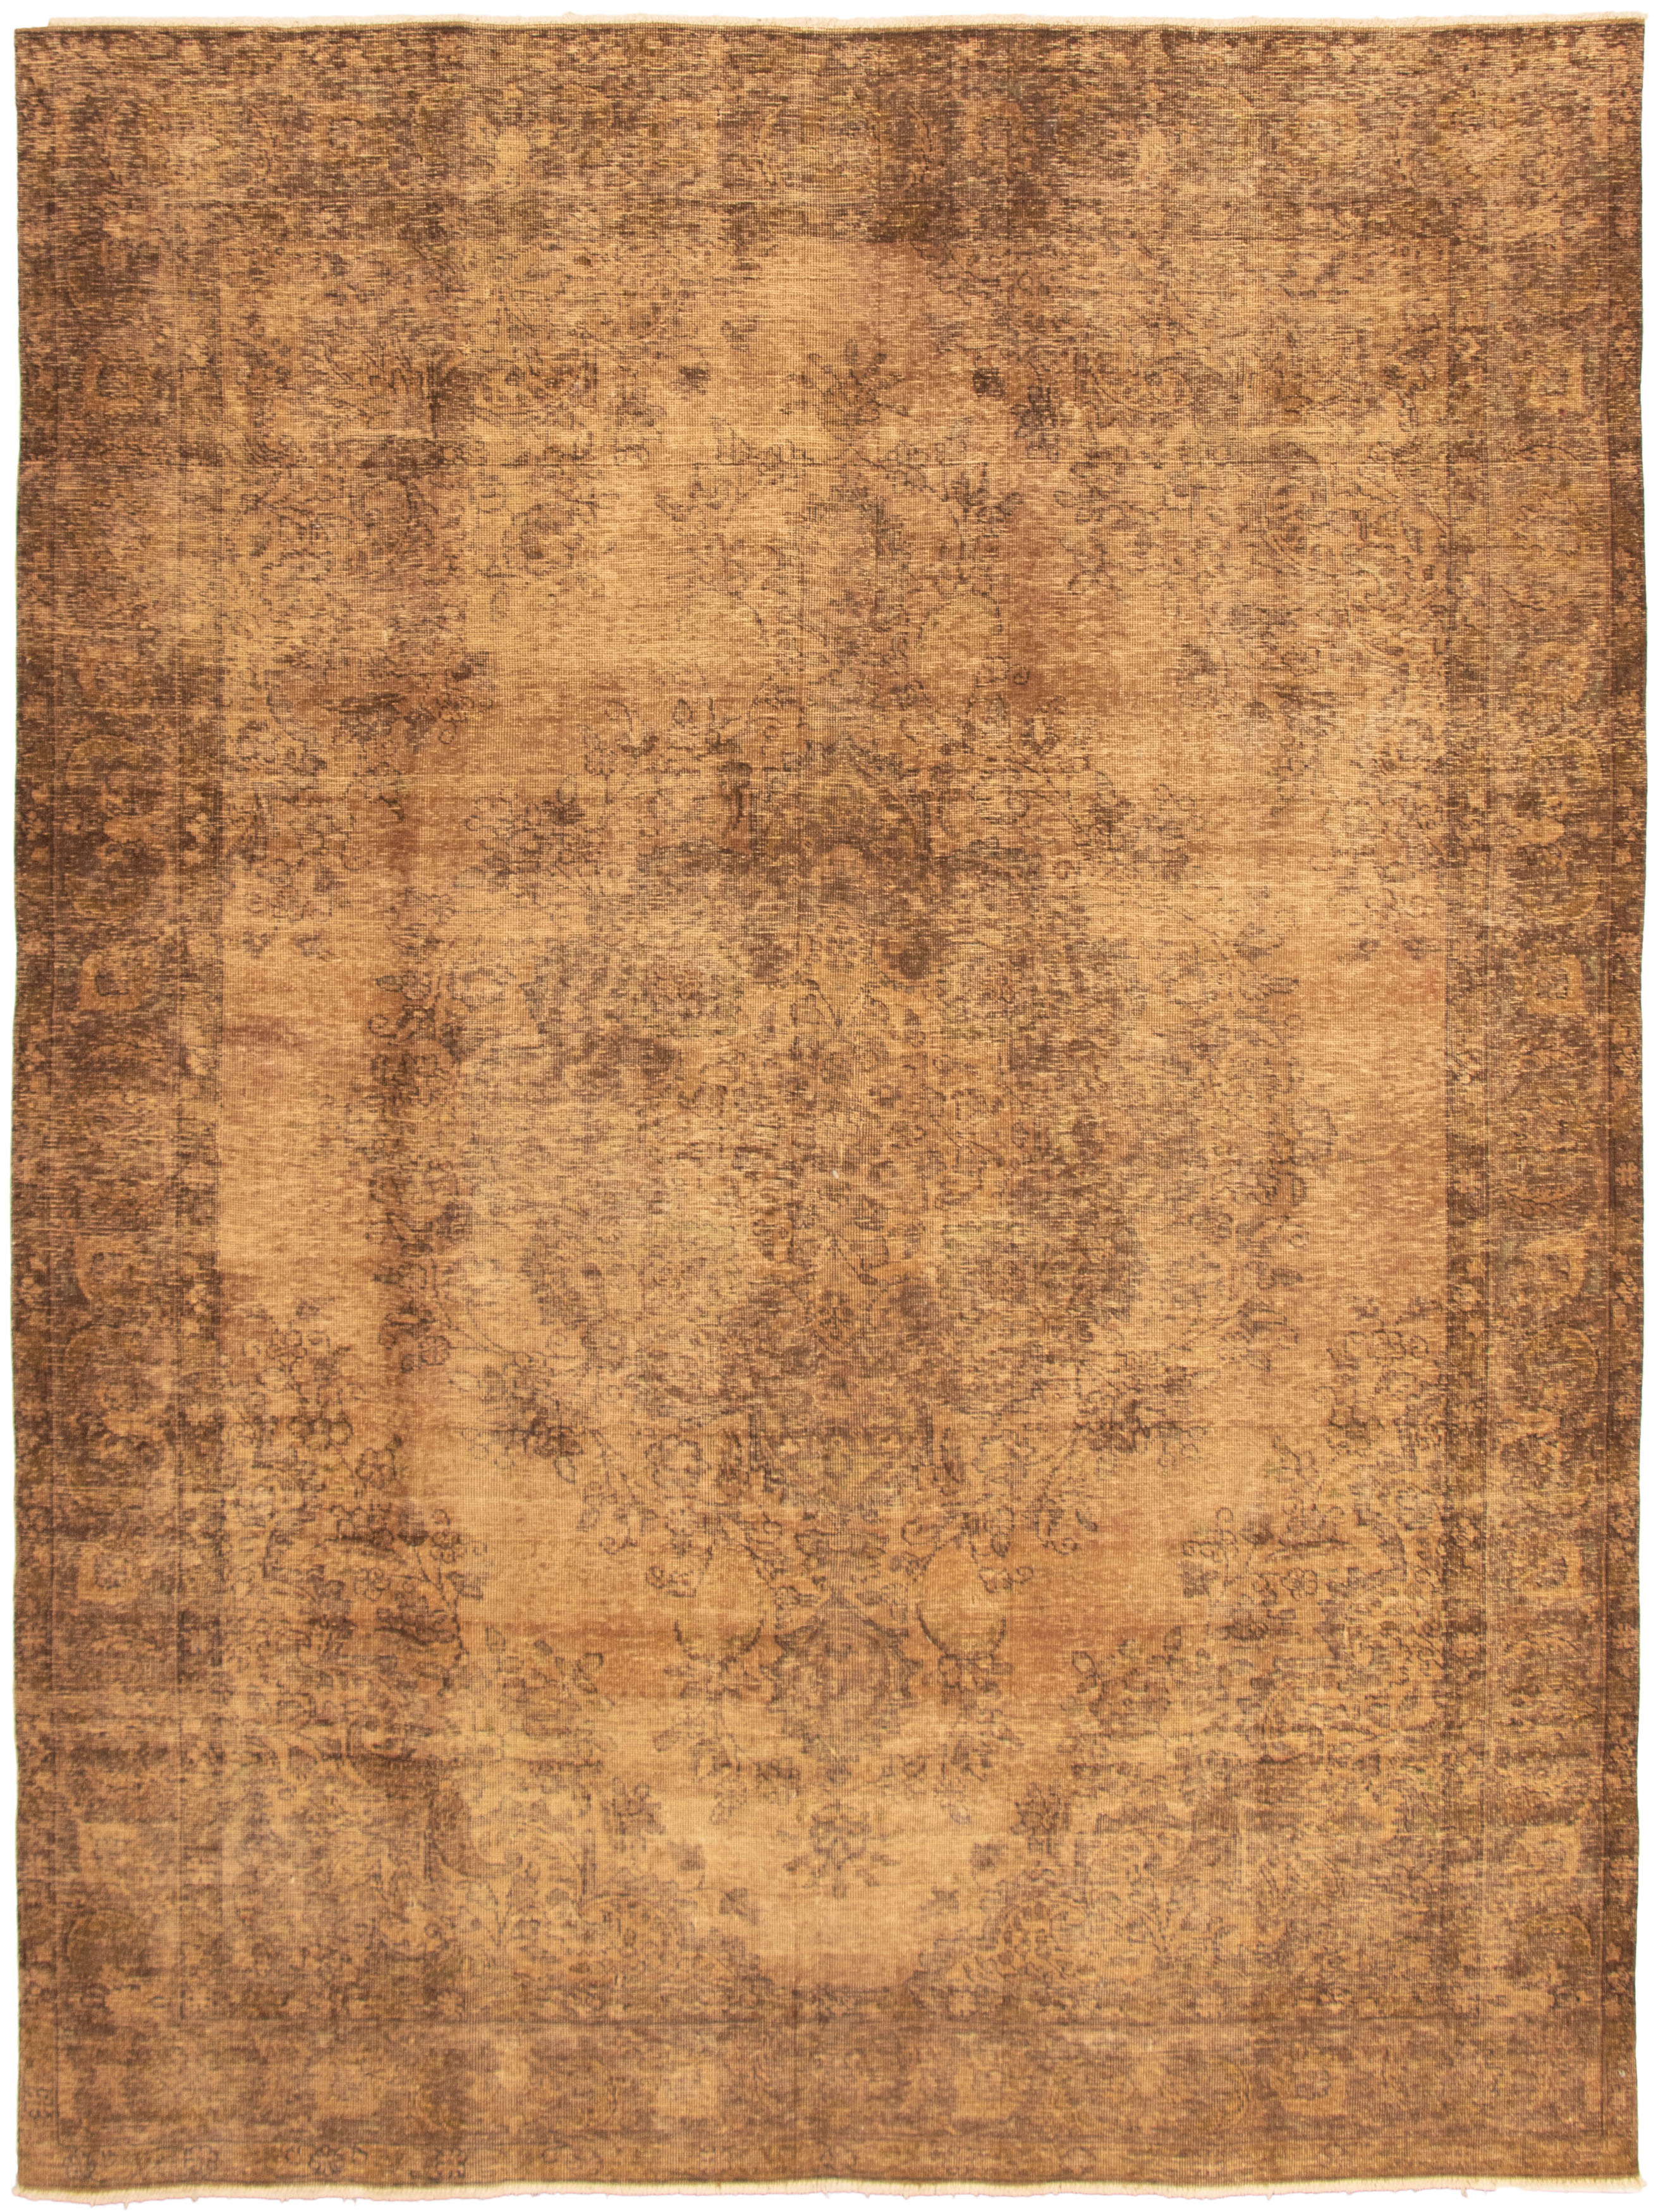 Hand-knotted Color Transition Brown Wool Rug 8'2" x 11'0" Size: 8'2" x 11'0"  